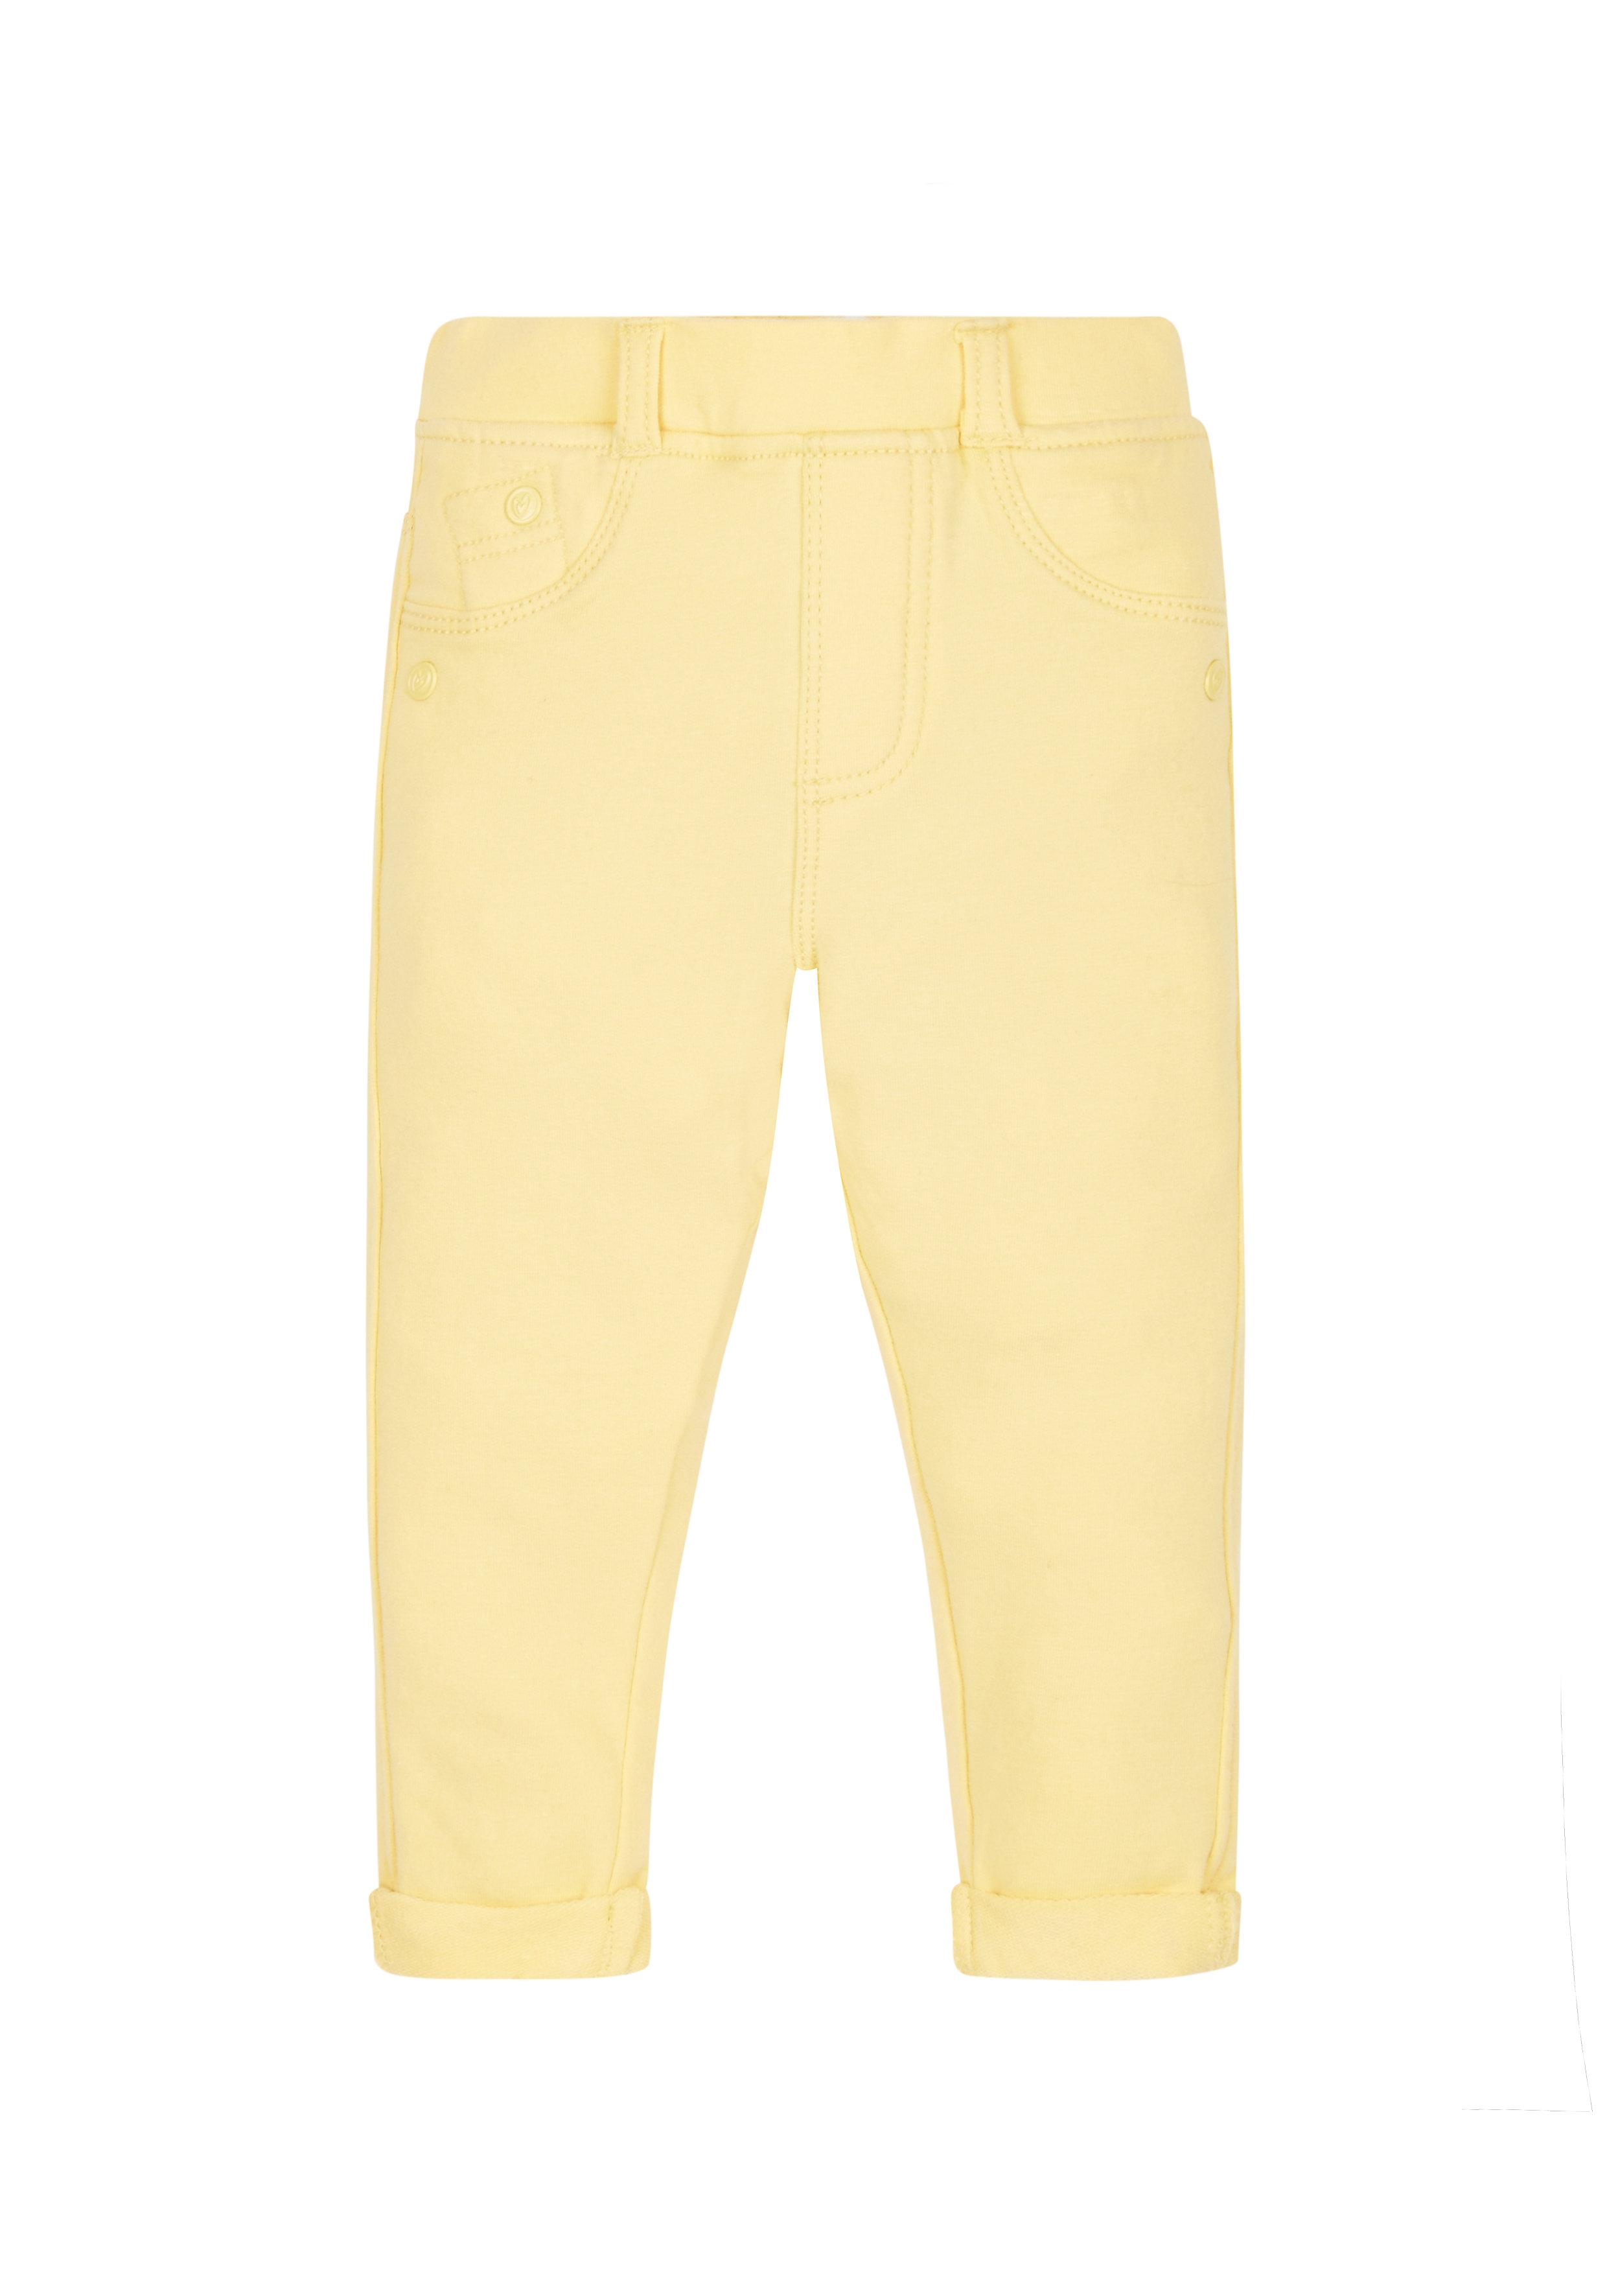 Mothercare | Girls Jeans - Yellow